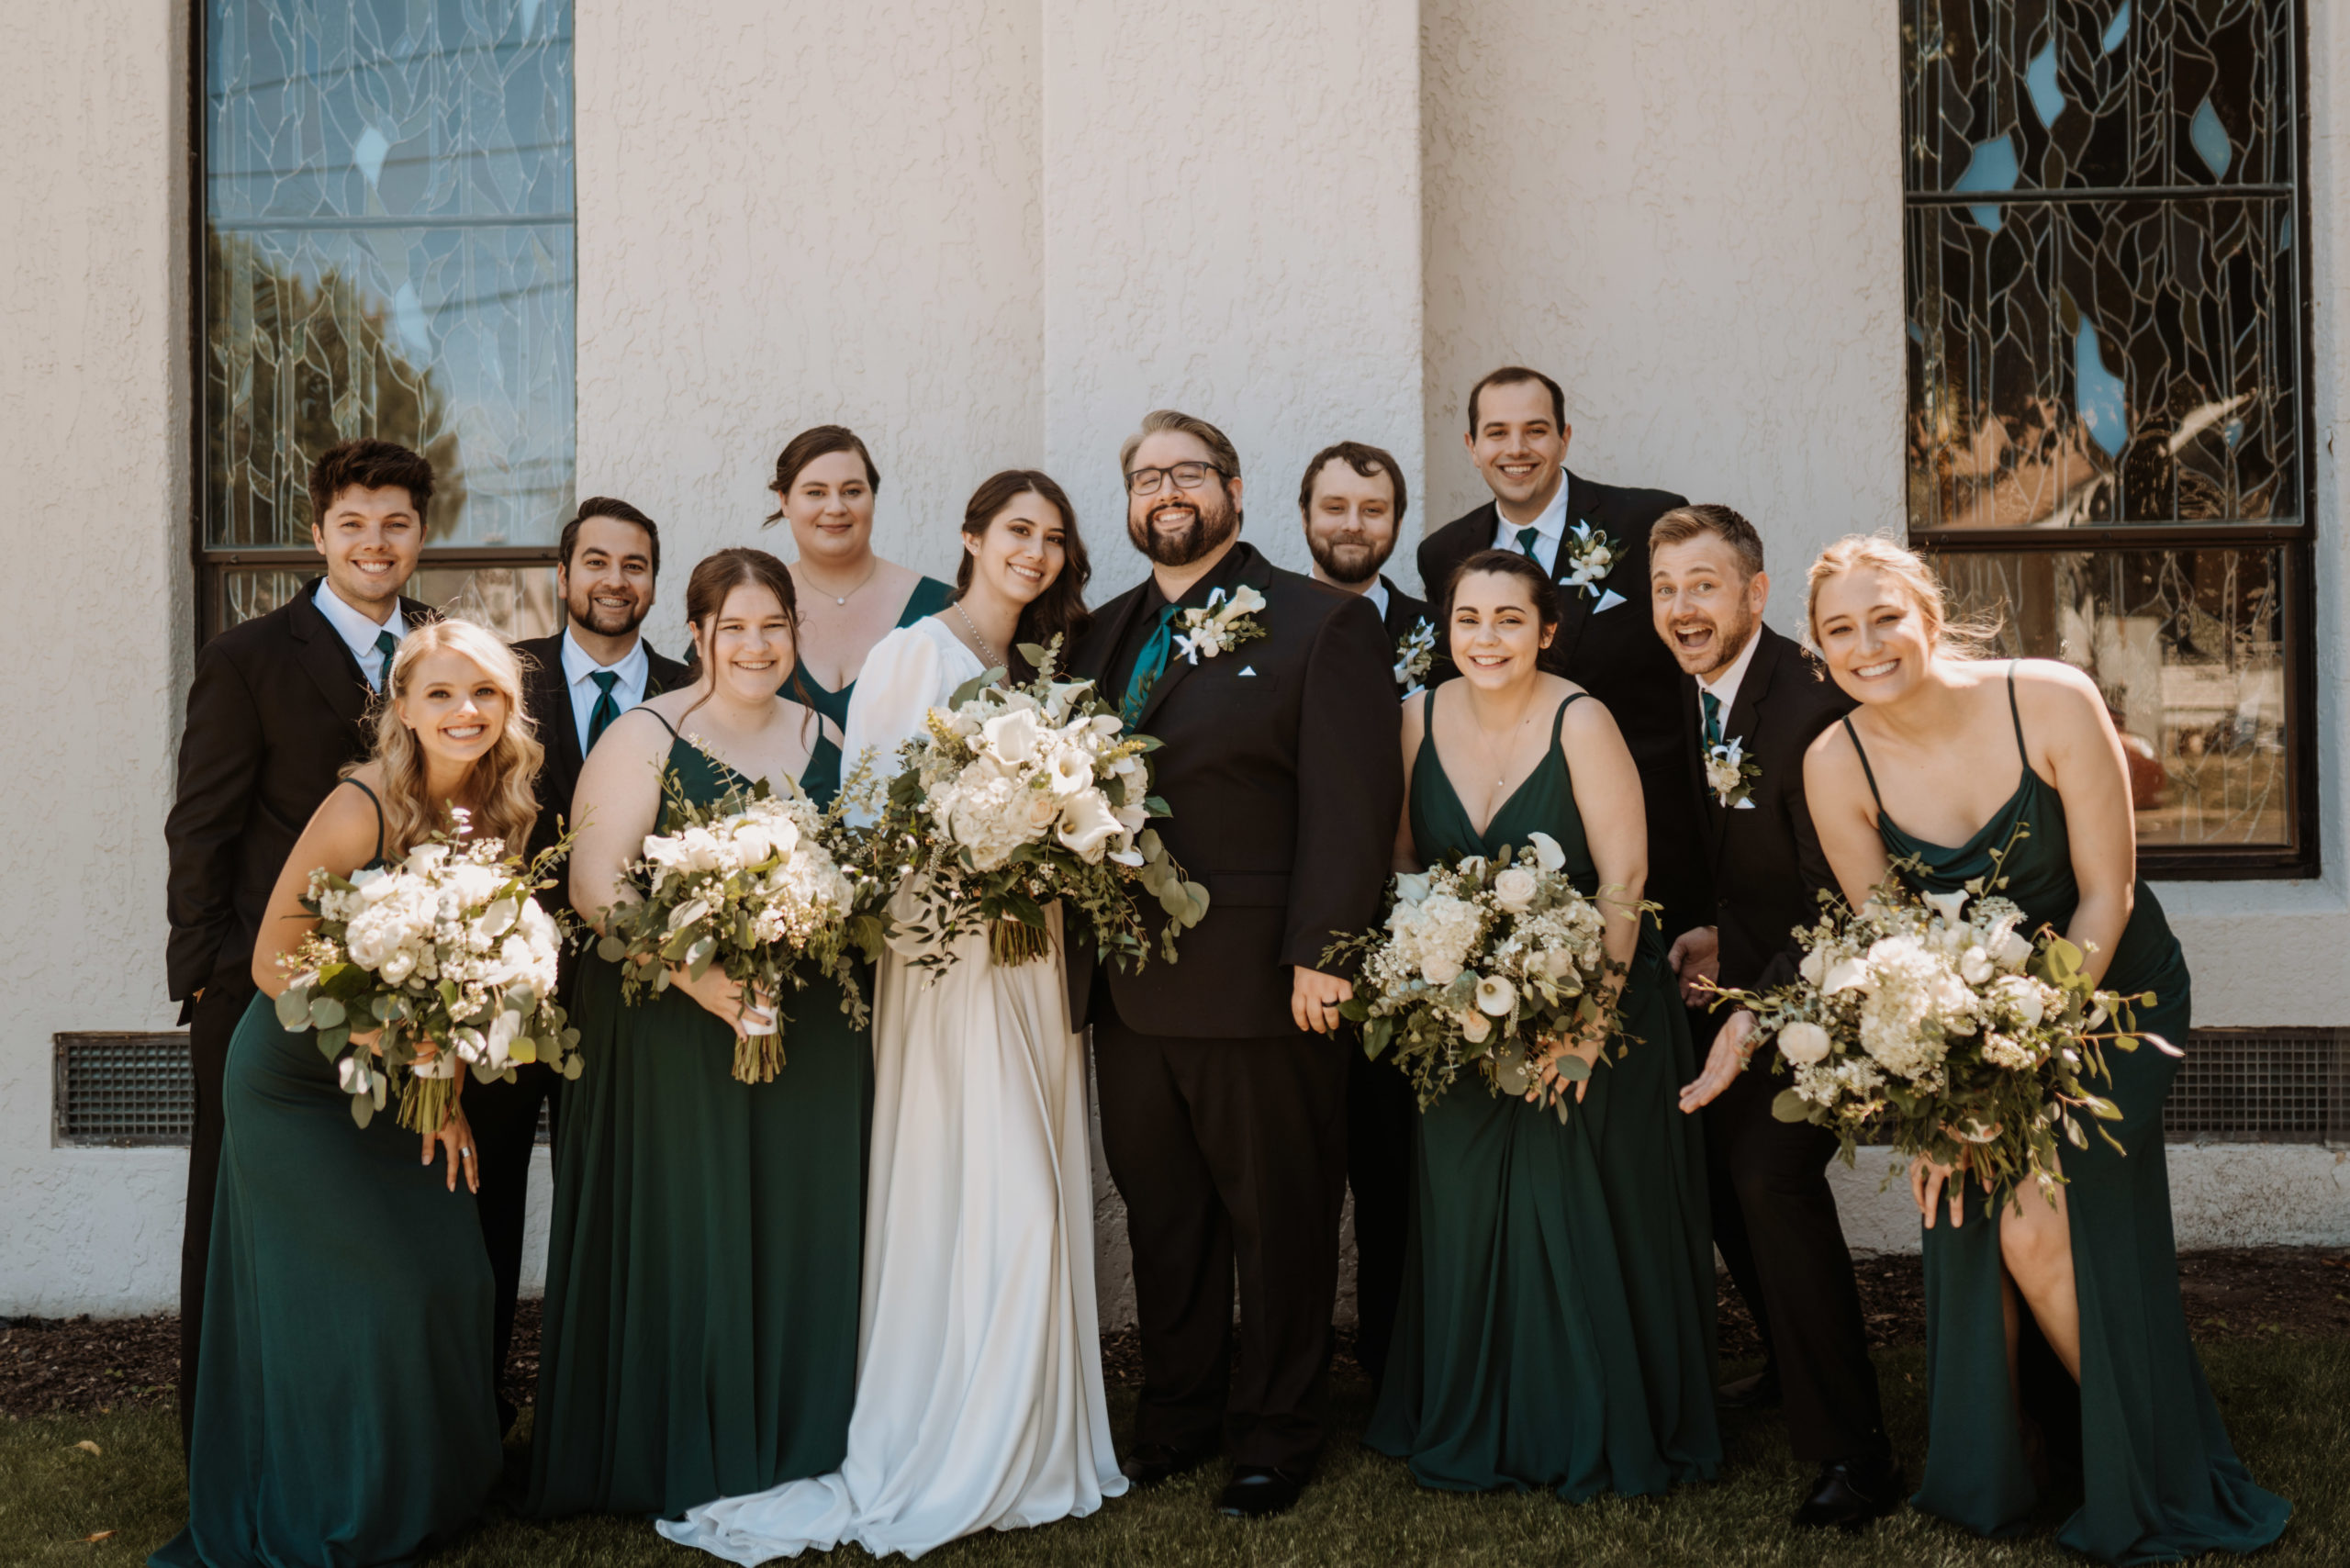 Entire wedding party in a group photo smiling and looking.